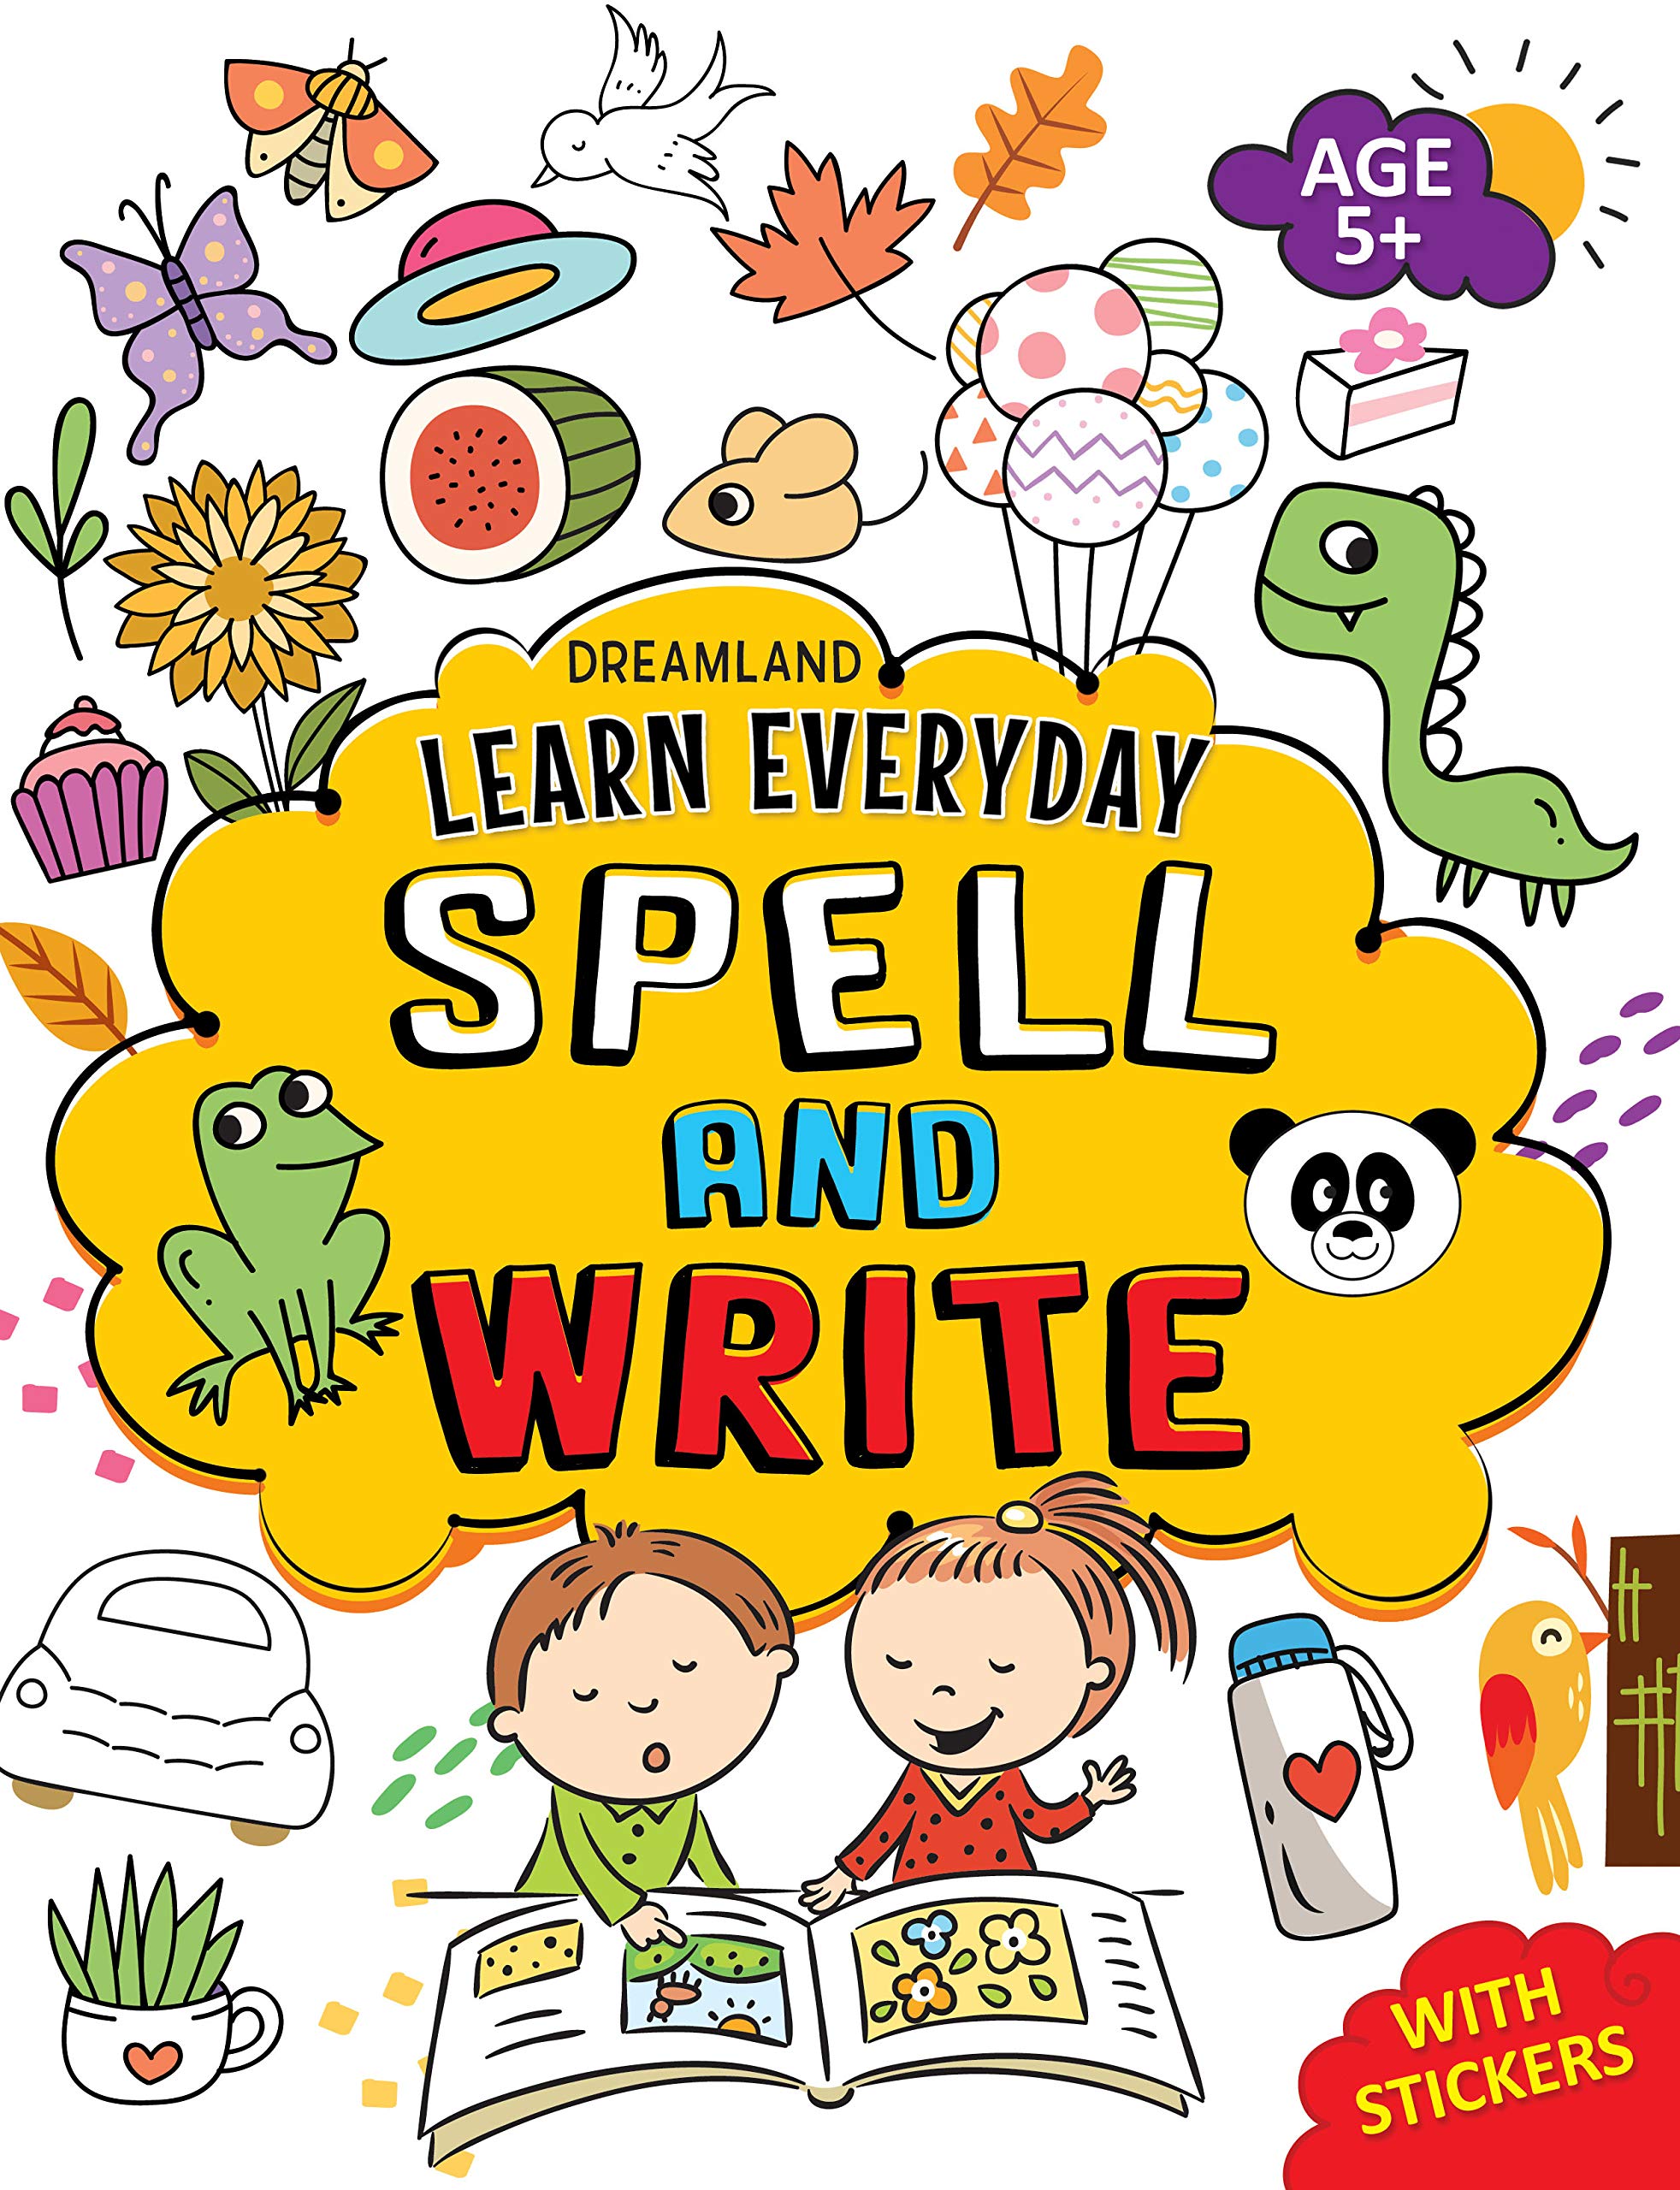 Spell and Write with Stickers - Learn Everyday Series For Children